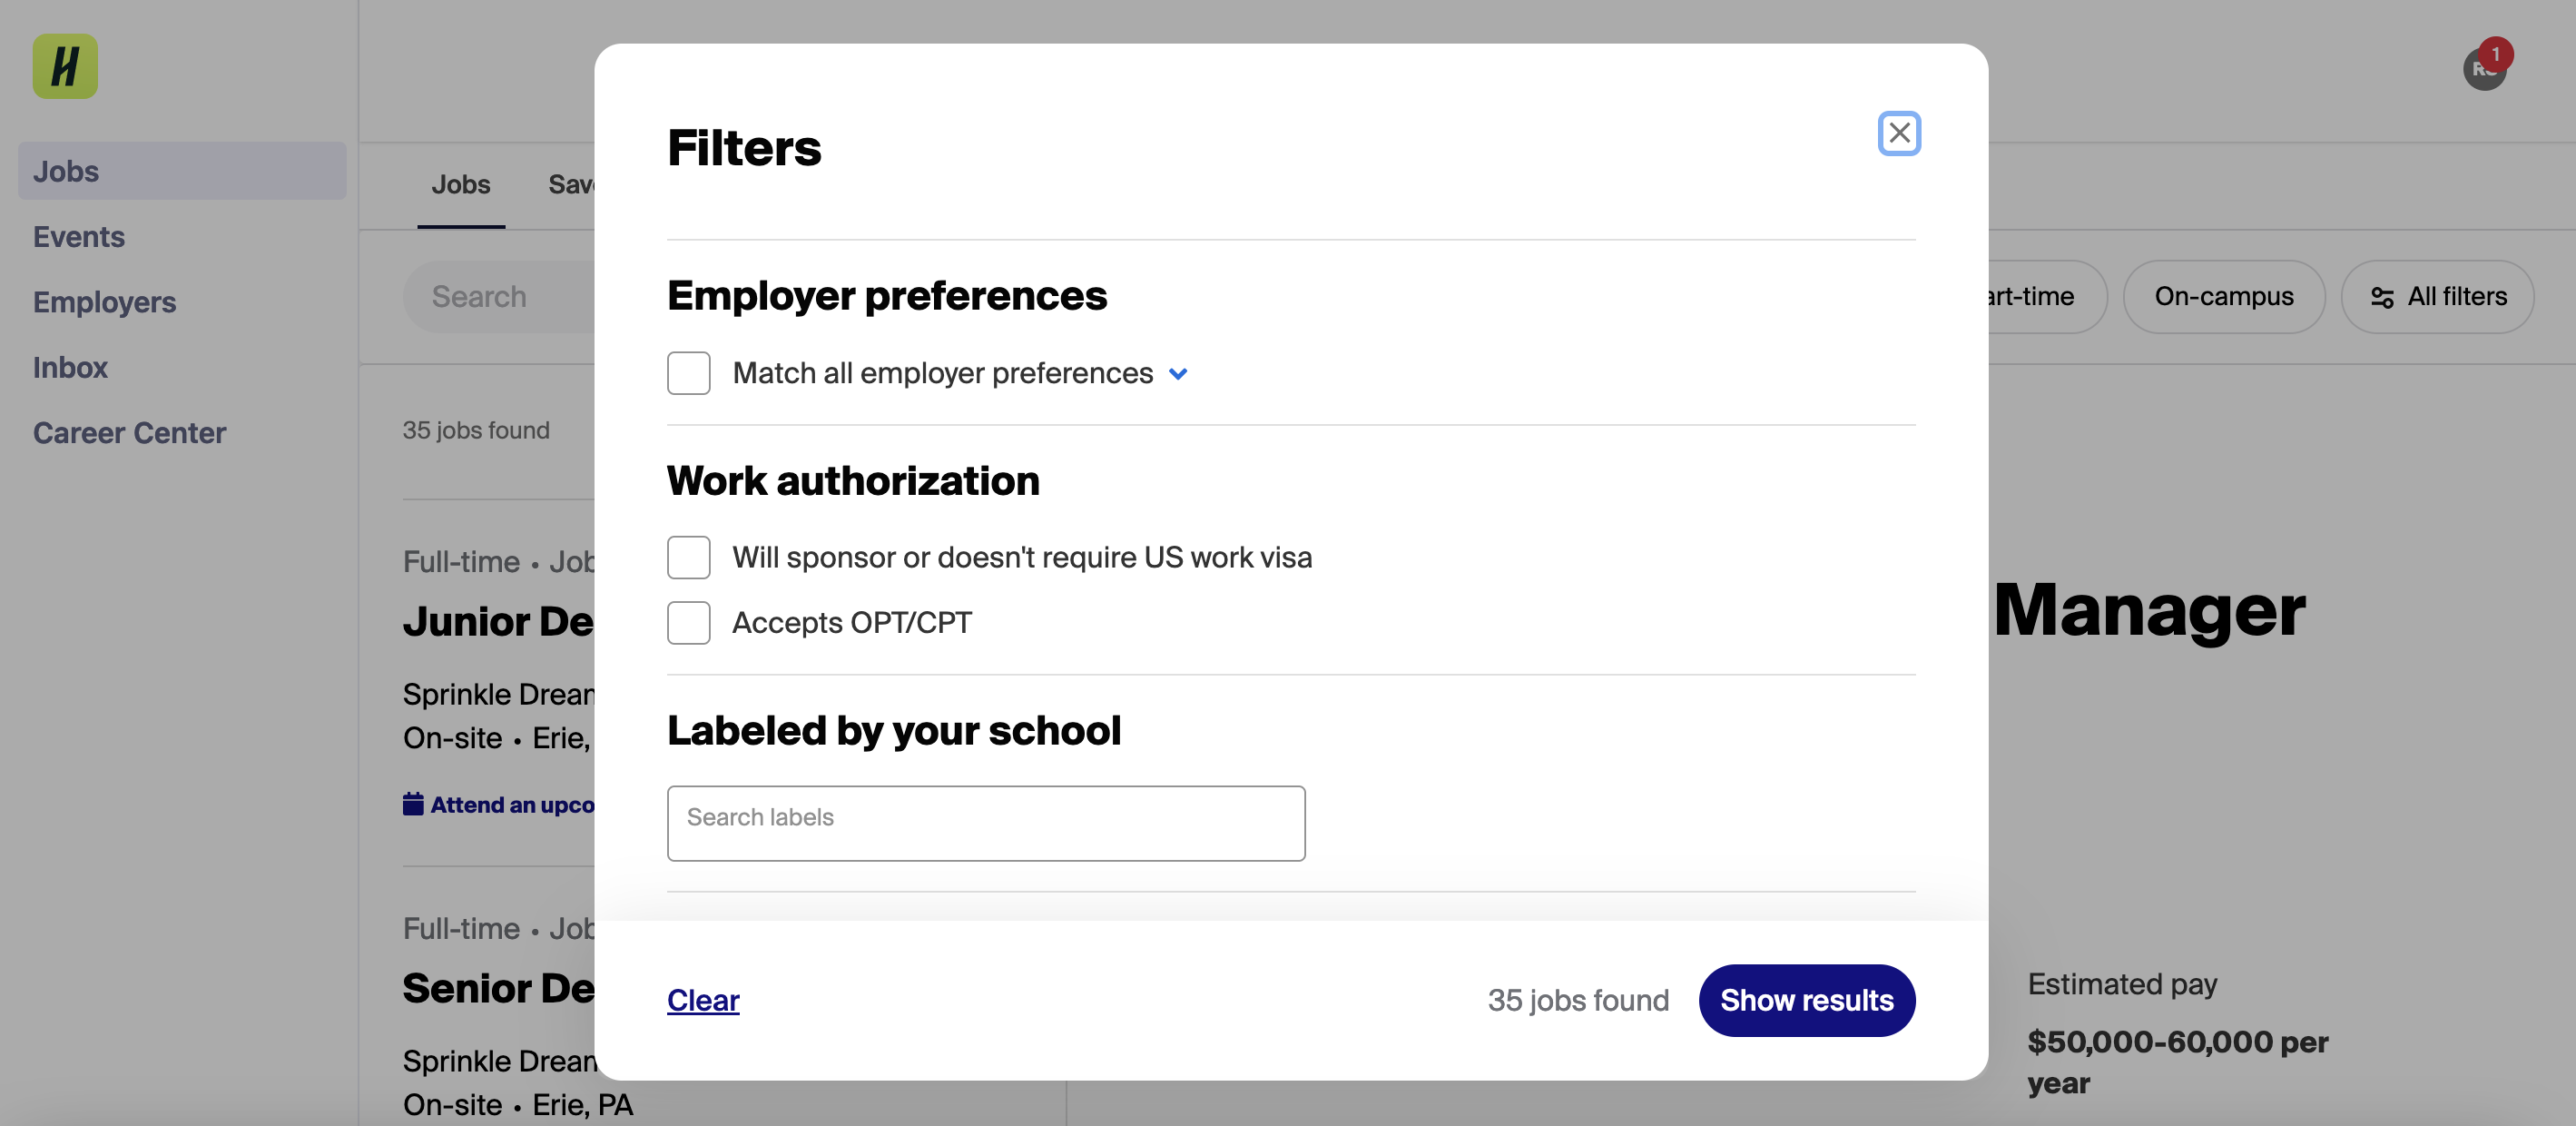 Work_Authorization_options_in_Job_Filters.png